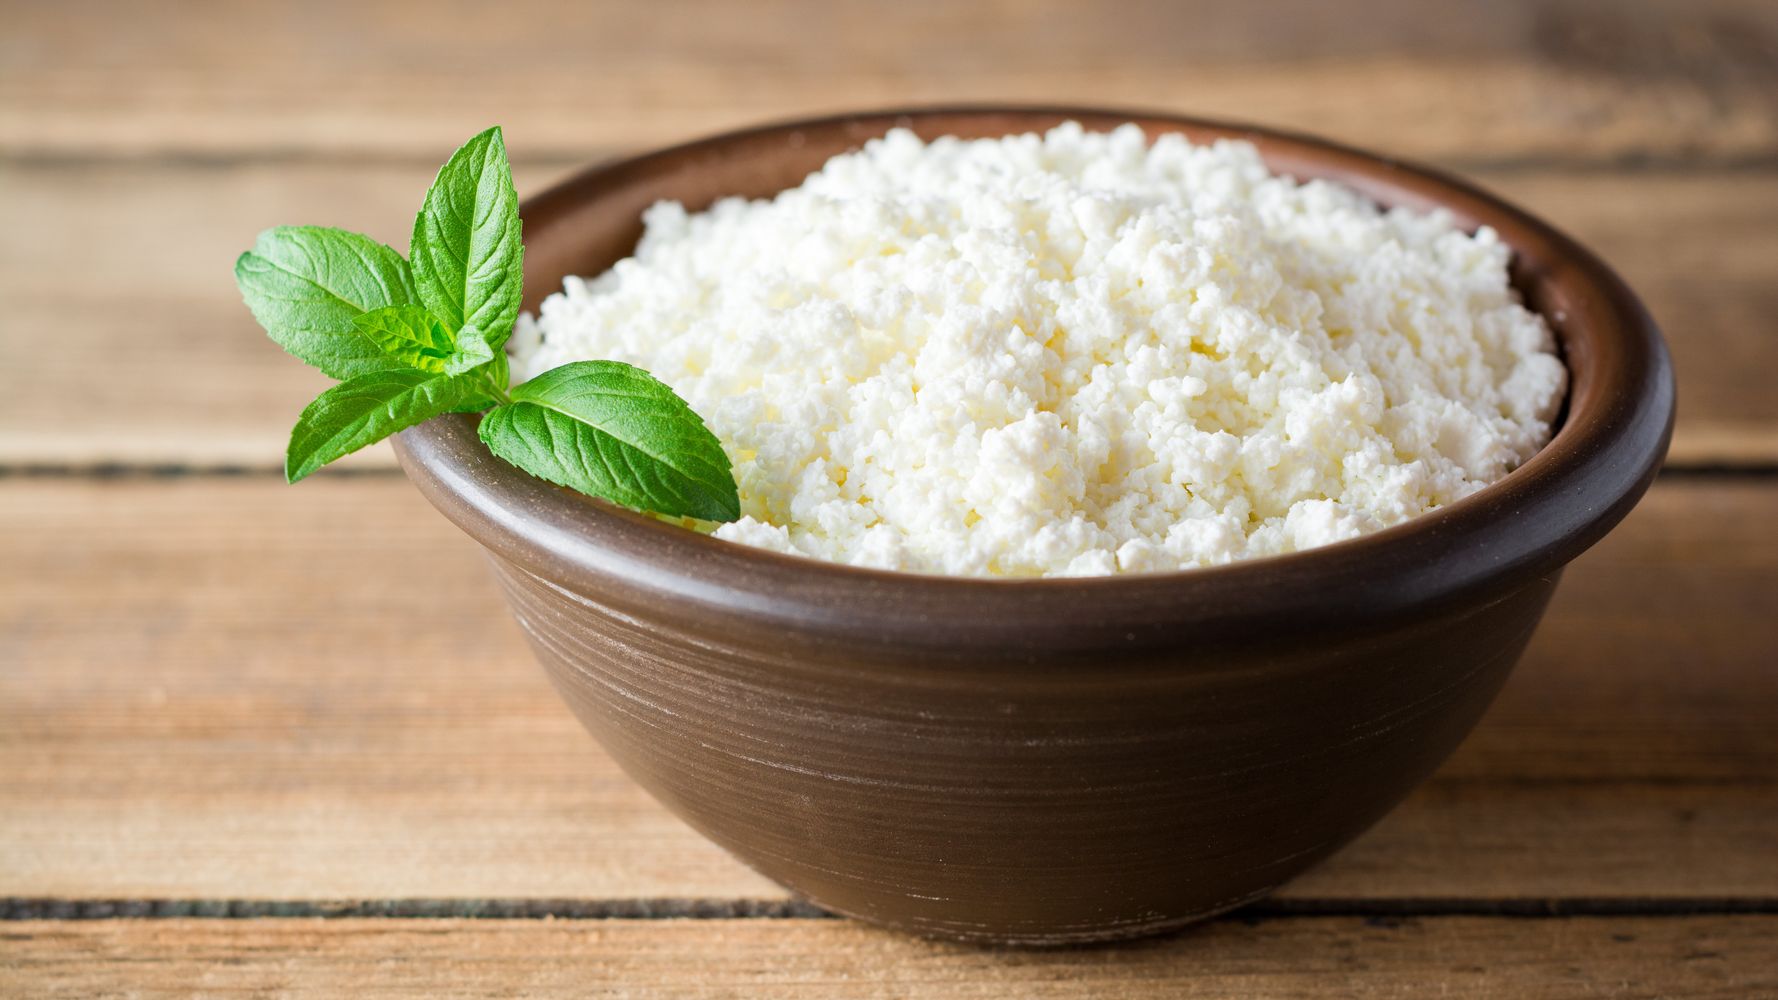 Cottage Cheese S Nutritional Benefits Rival Yogurt S So Why Are